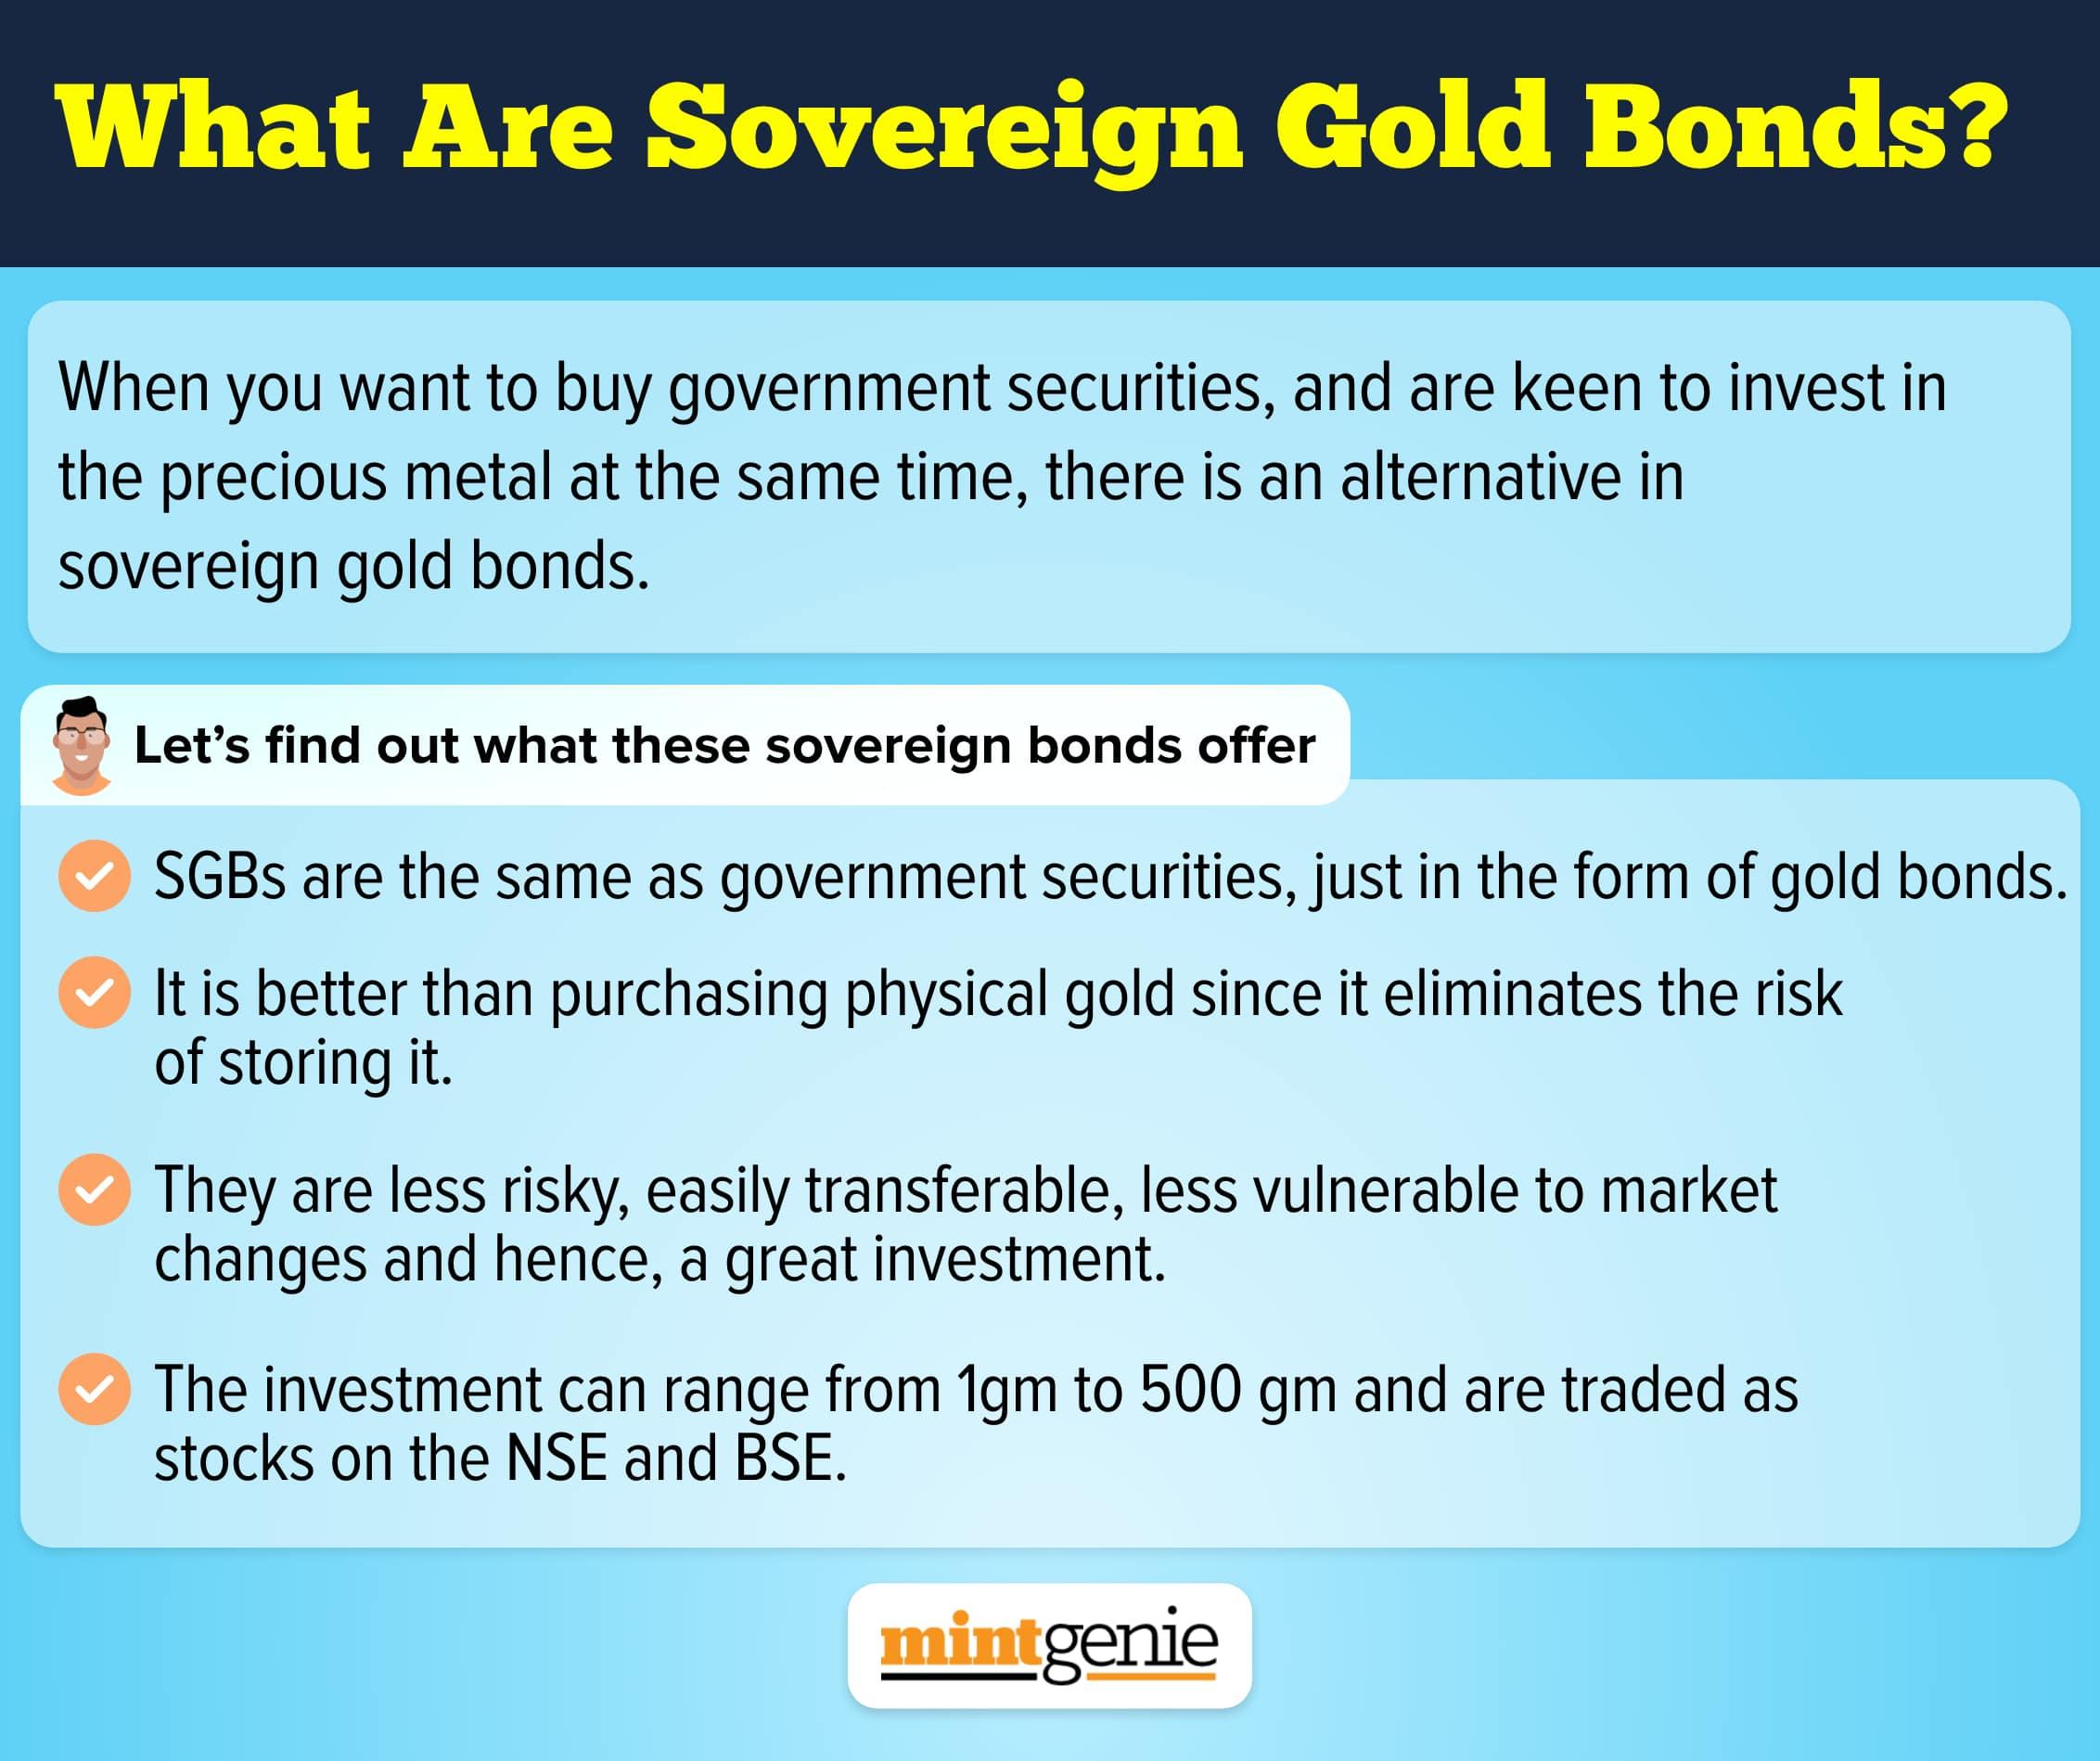 Sovereign Gold Bonds (SGBs) are government securities denominated in gold with one gram as a basic unit.